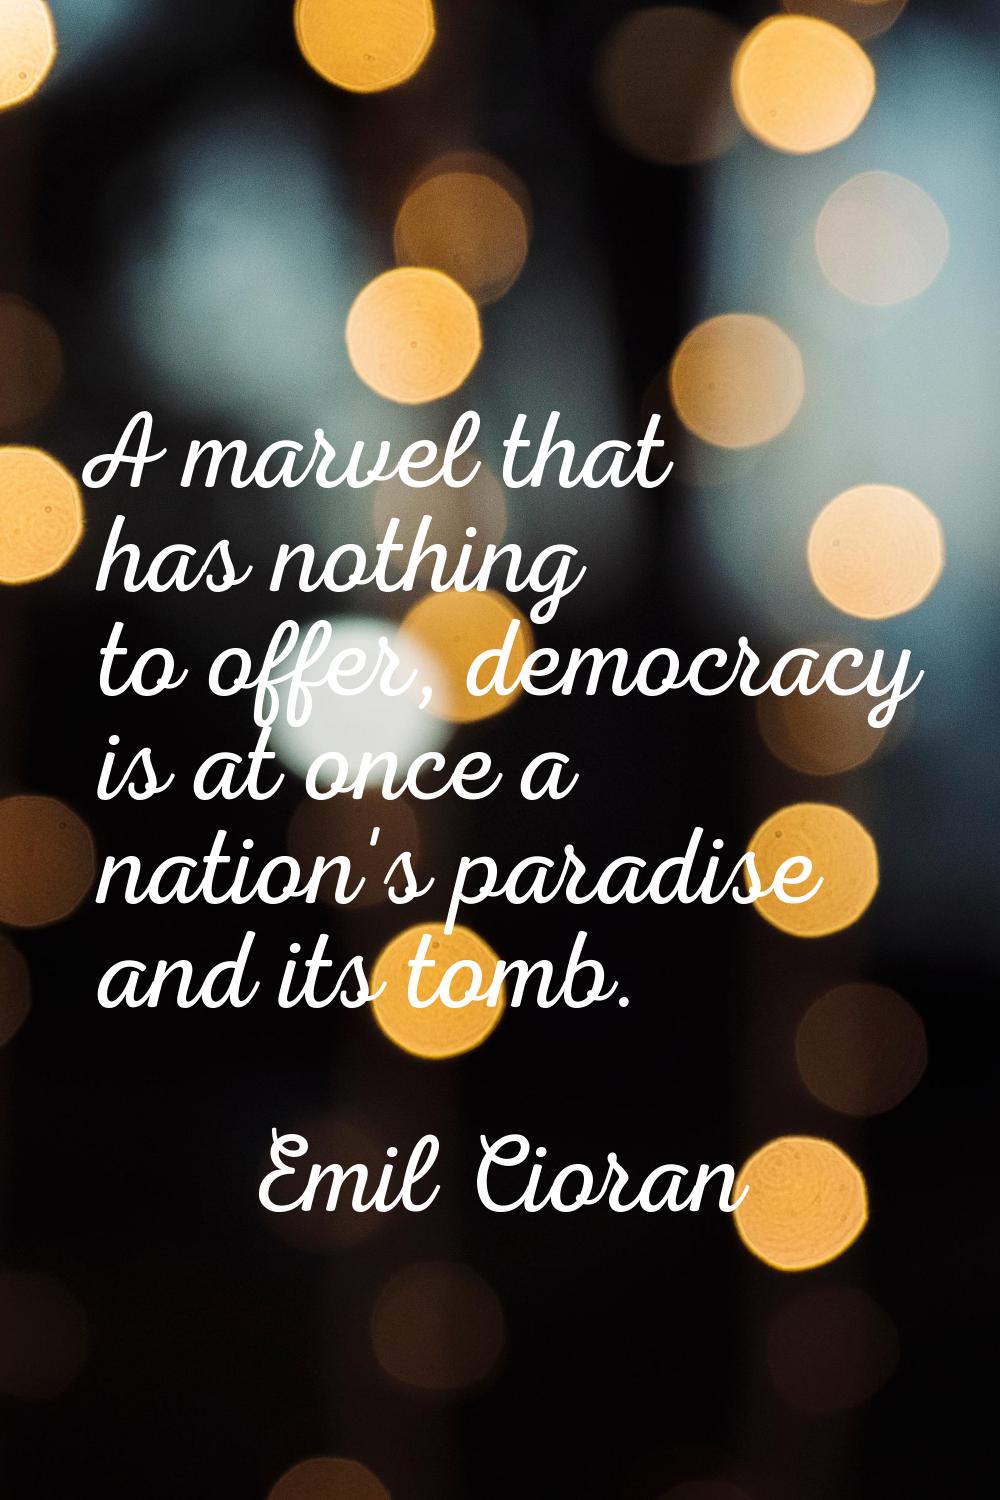 A marvel that has nothing to offer, democracy is at once a nation's paradise and its tomb.